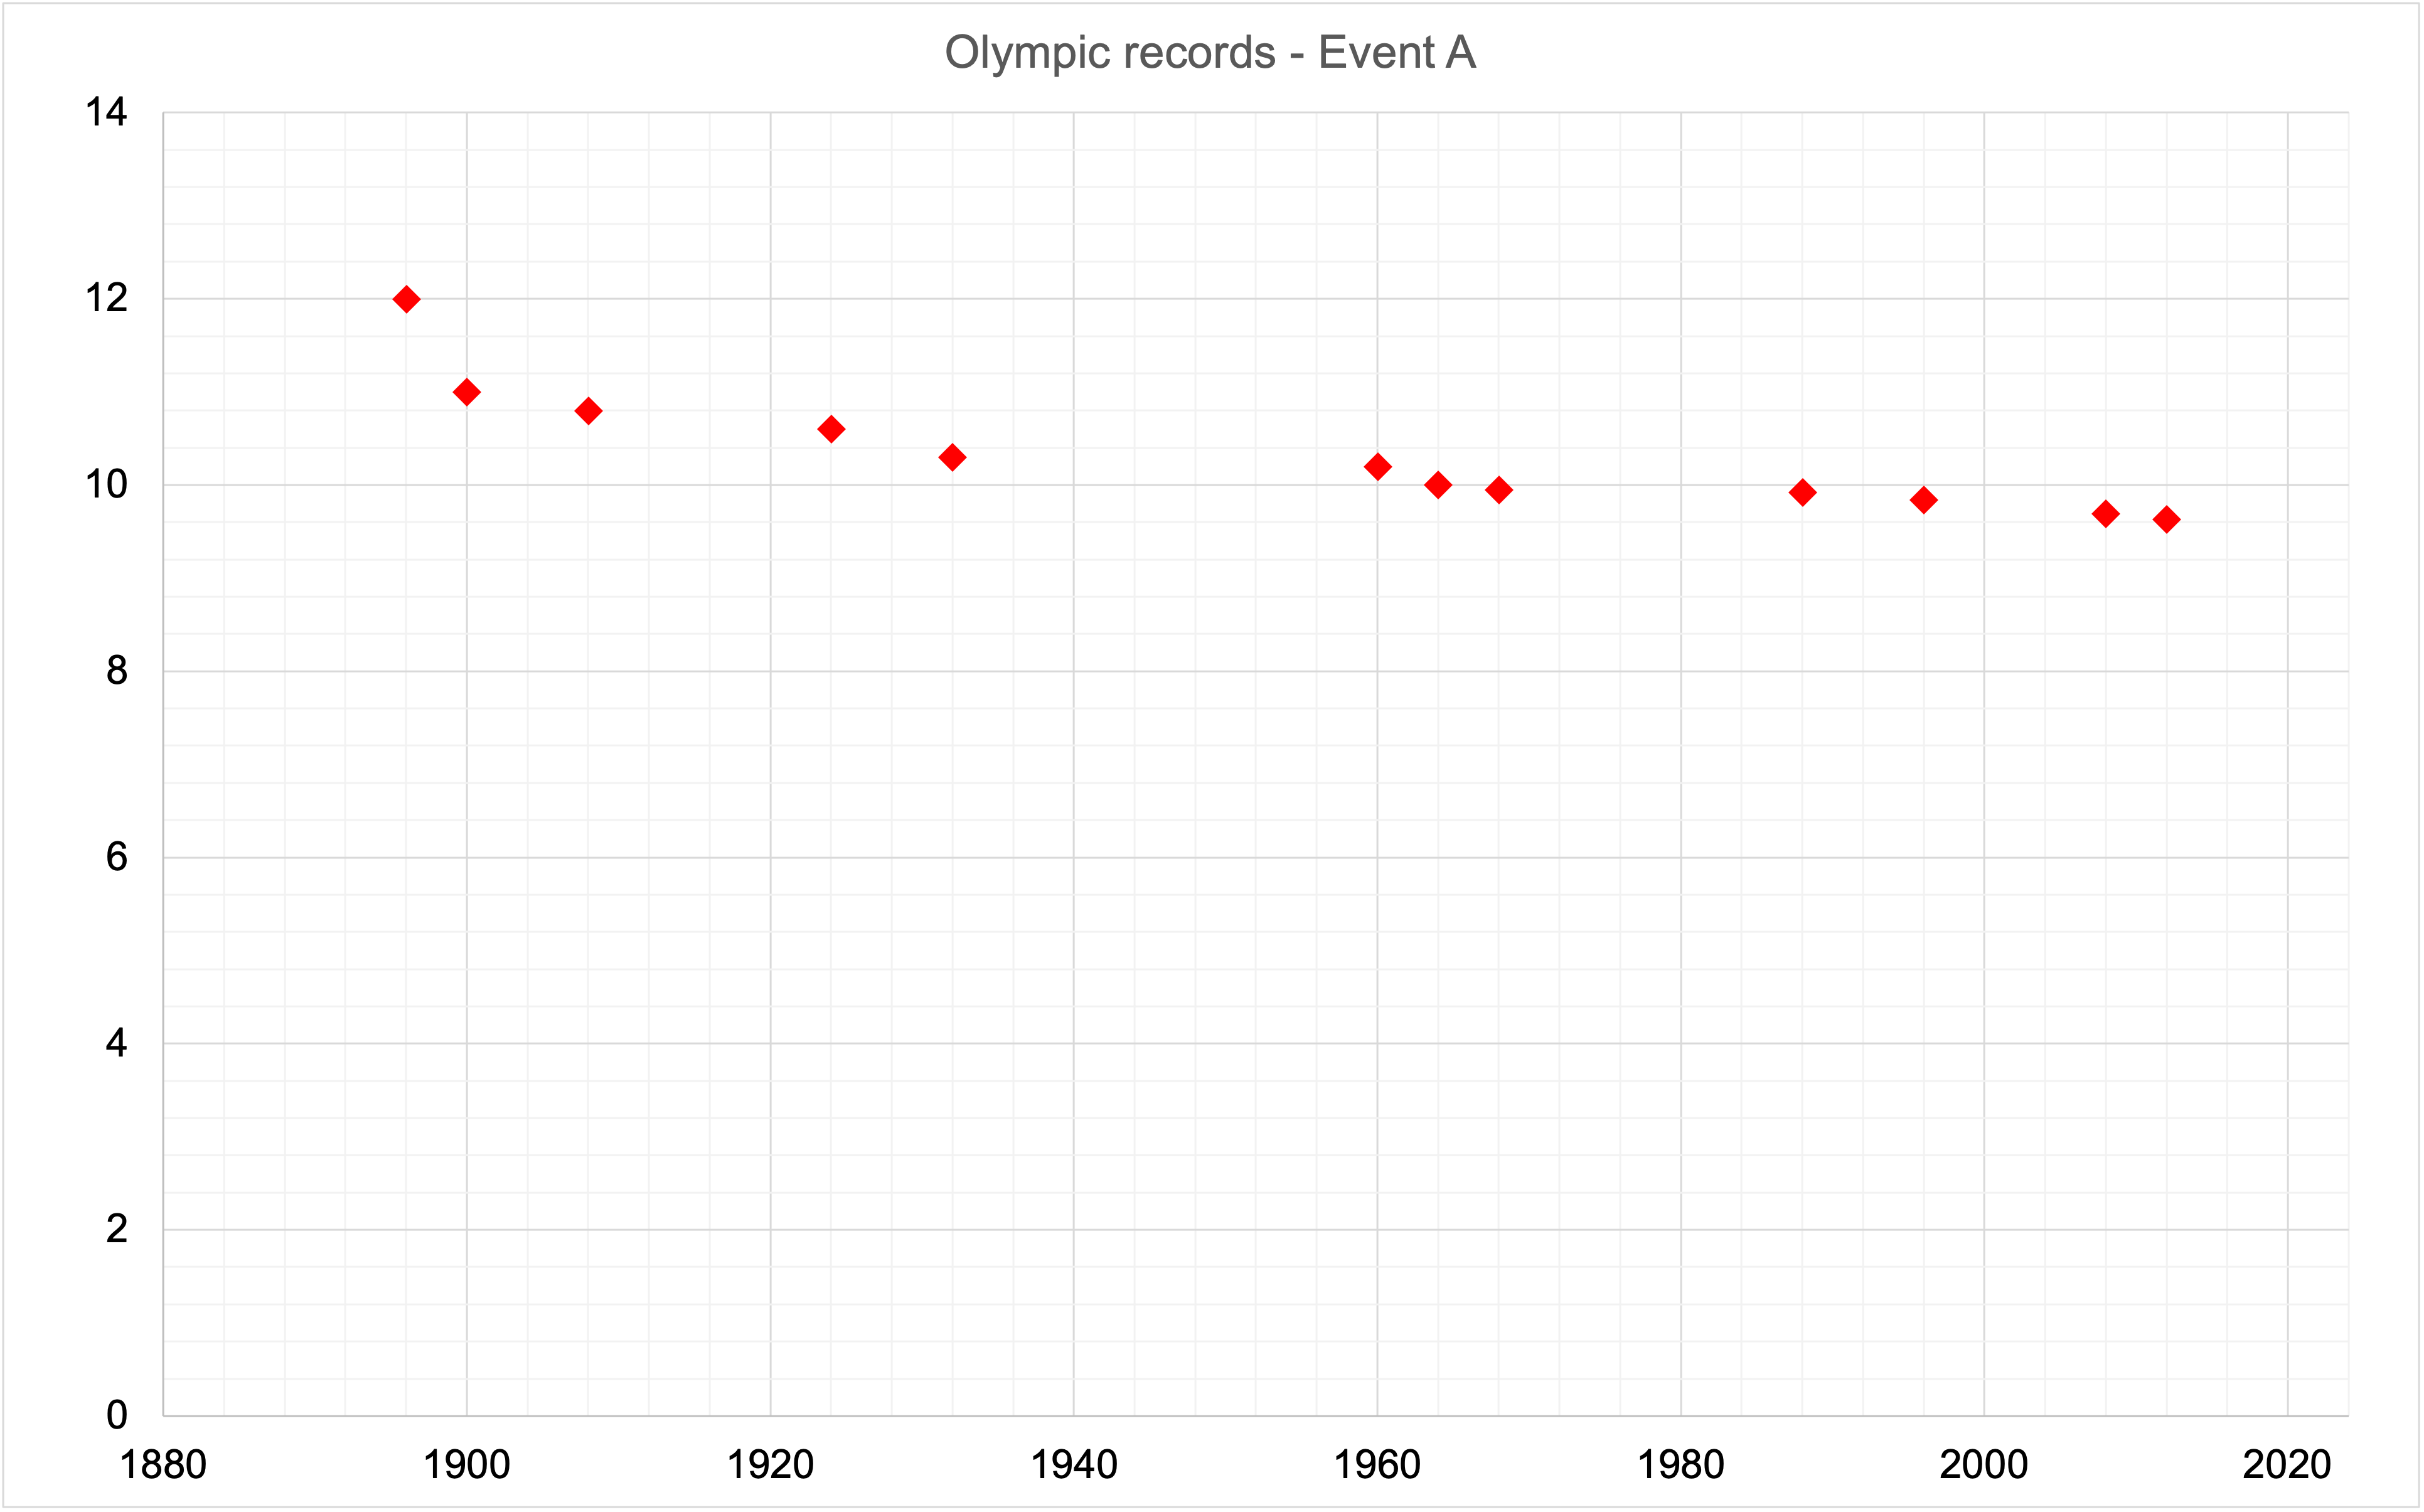 Graph showing Olympic records for Event A